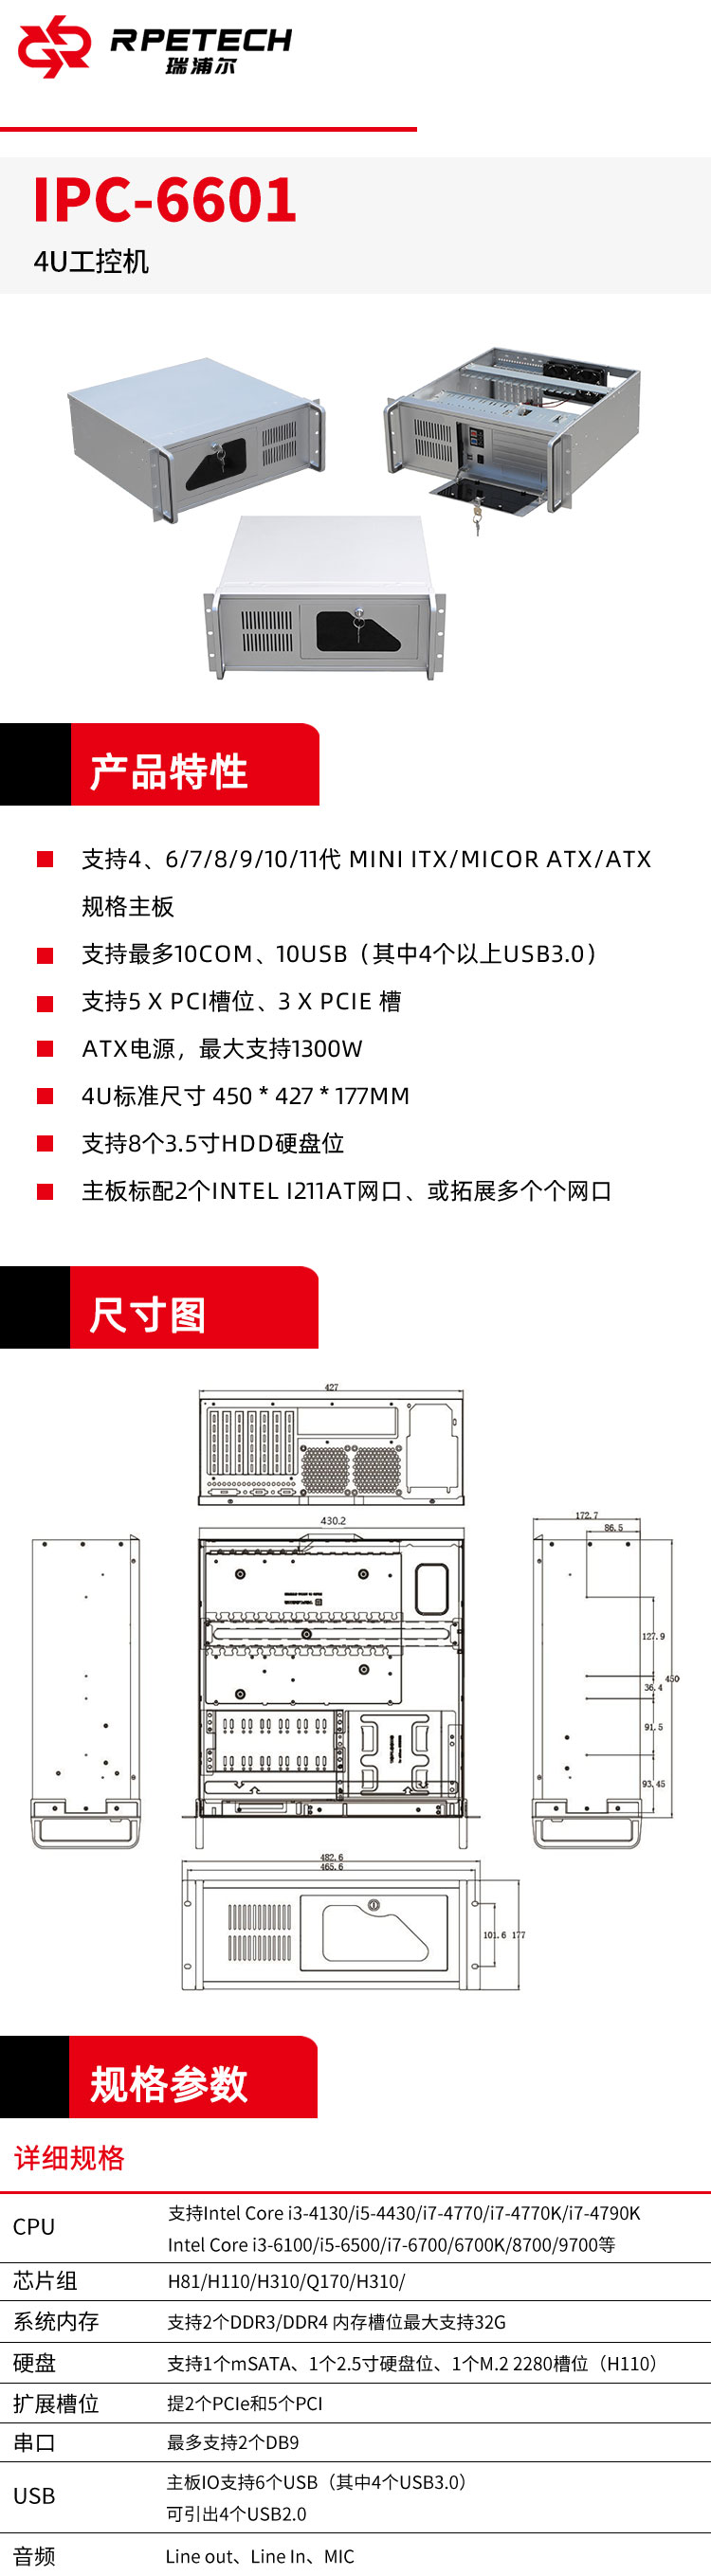 Ripple mount 4U industrial computer IPC embedded industrial computer all-in-one machine supports customization